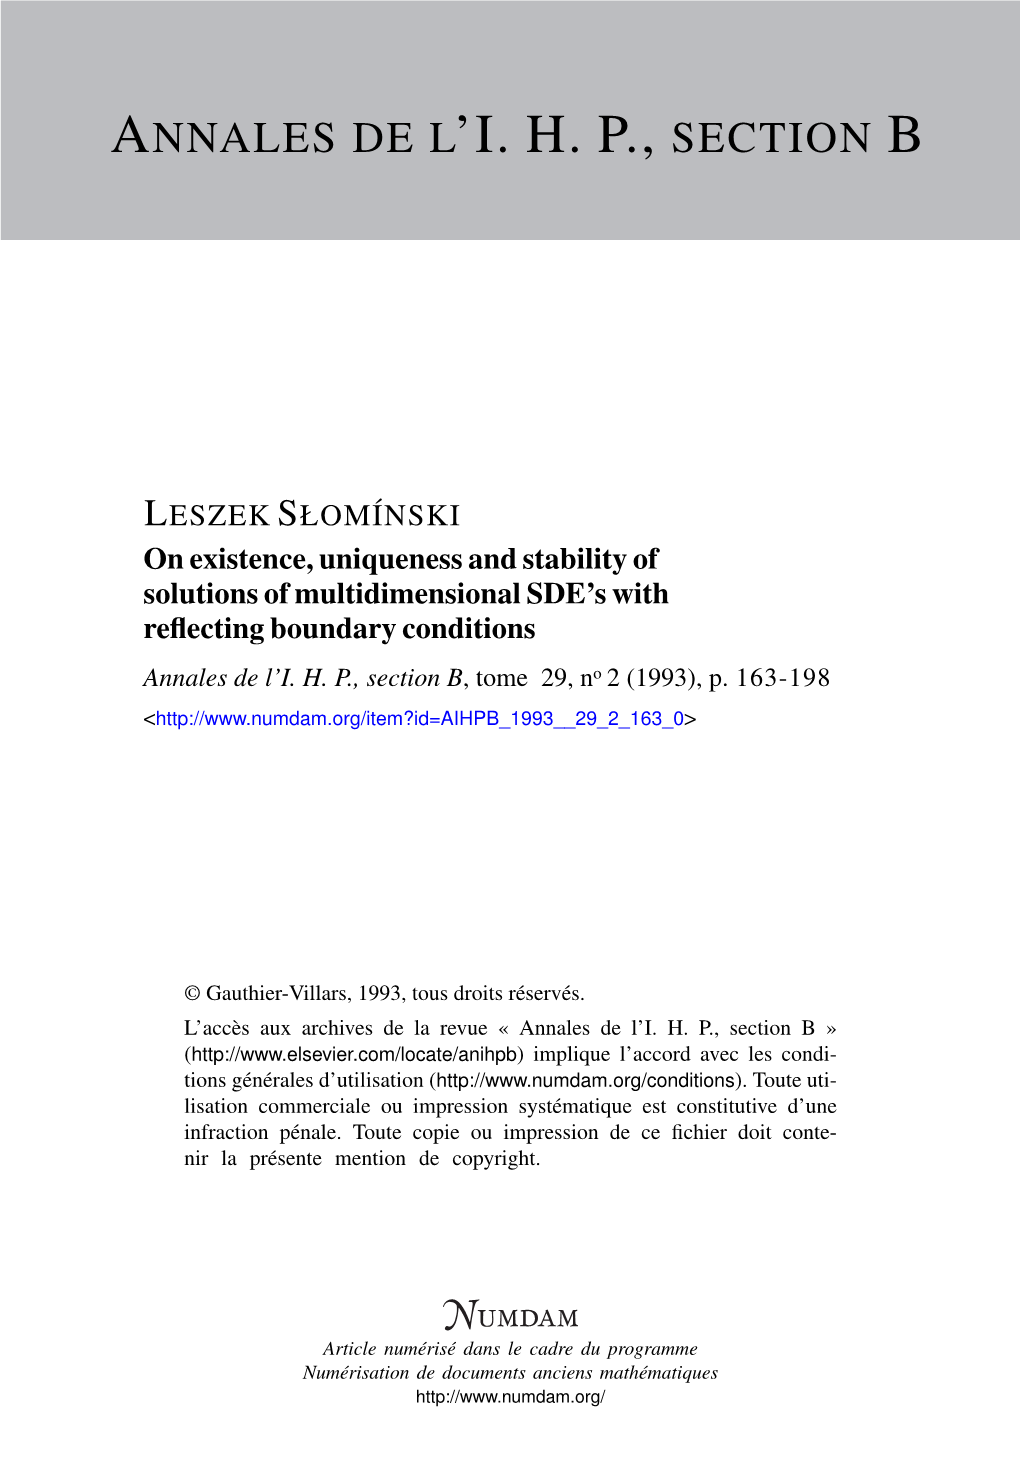 On Existence, Uniqueness and Stability of Solutions of Multidimensional SDE’S with Reﬂecting Boundary Conditions Annales De L’I